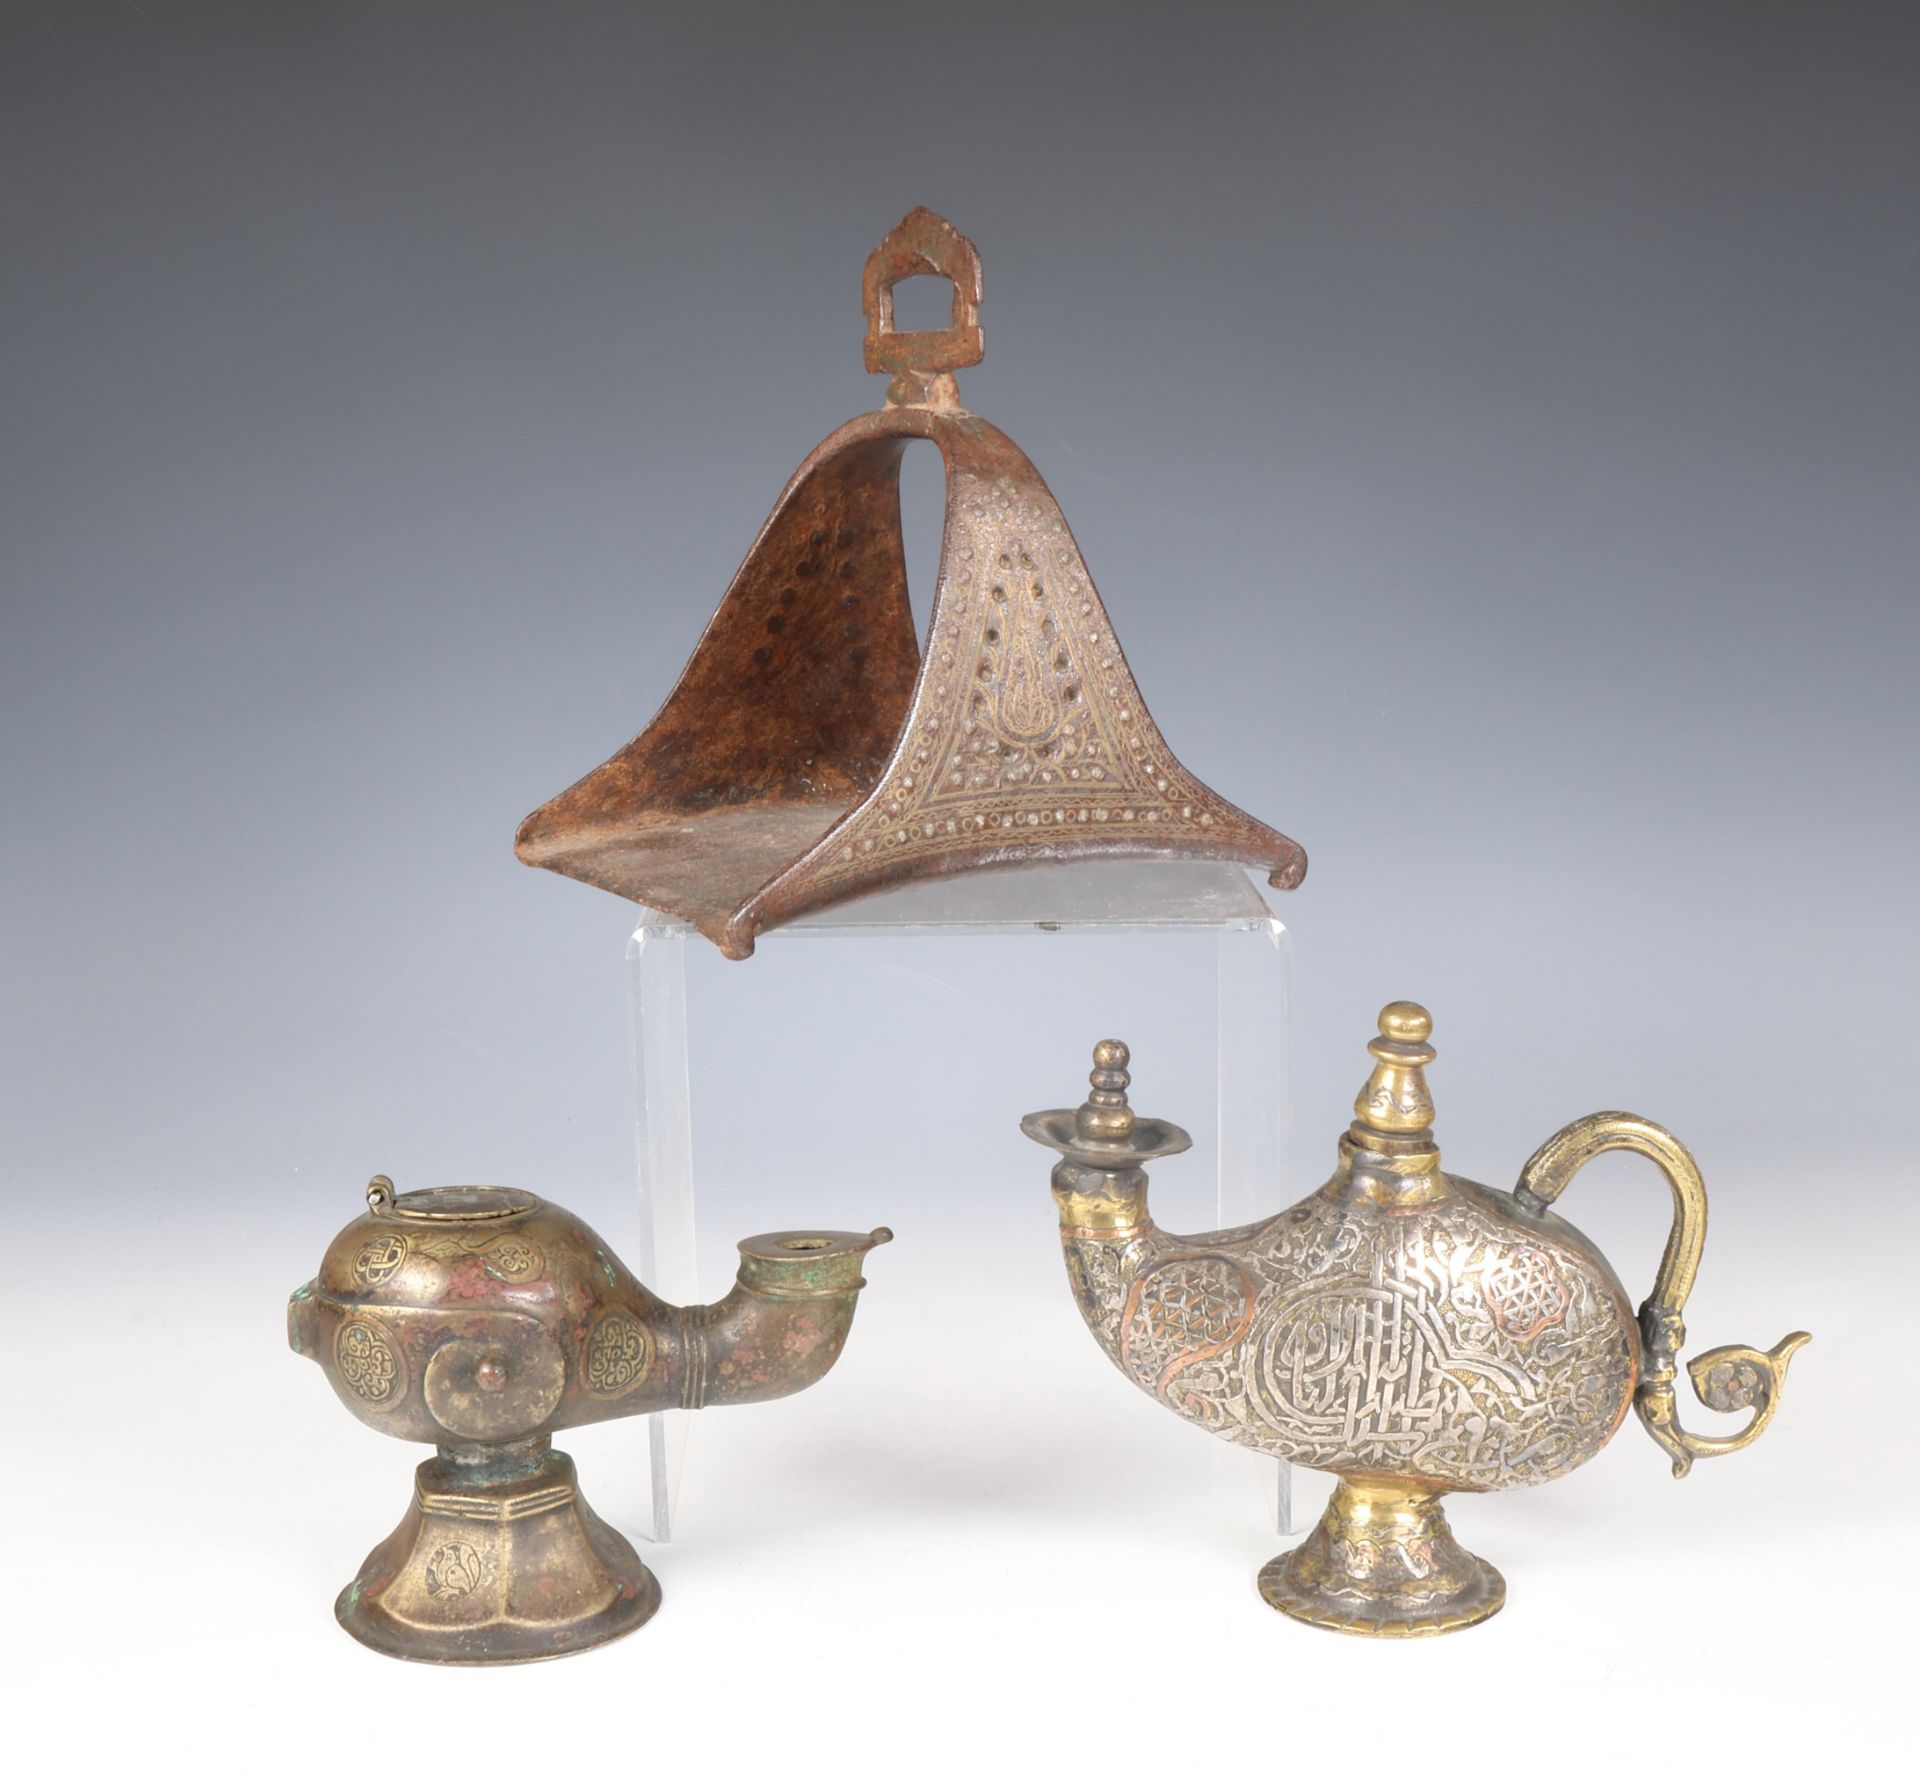 Iran, a metal horse shoe stirrup, a bronze oillamp and a bronze water sprinkler highlighted with sil